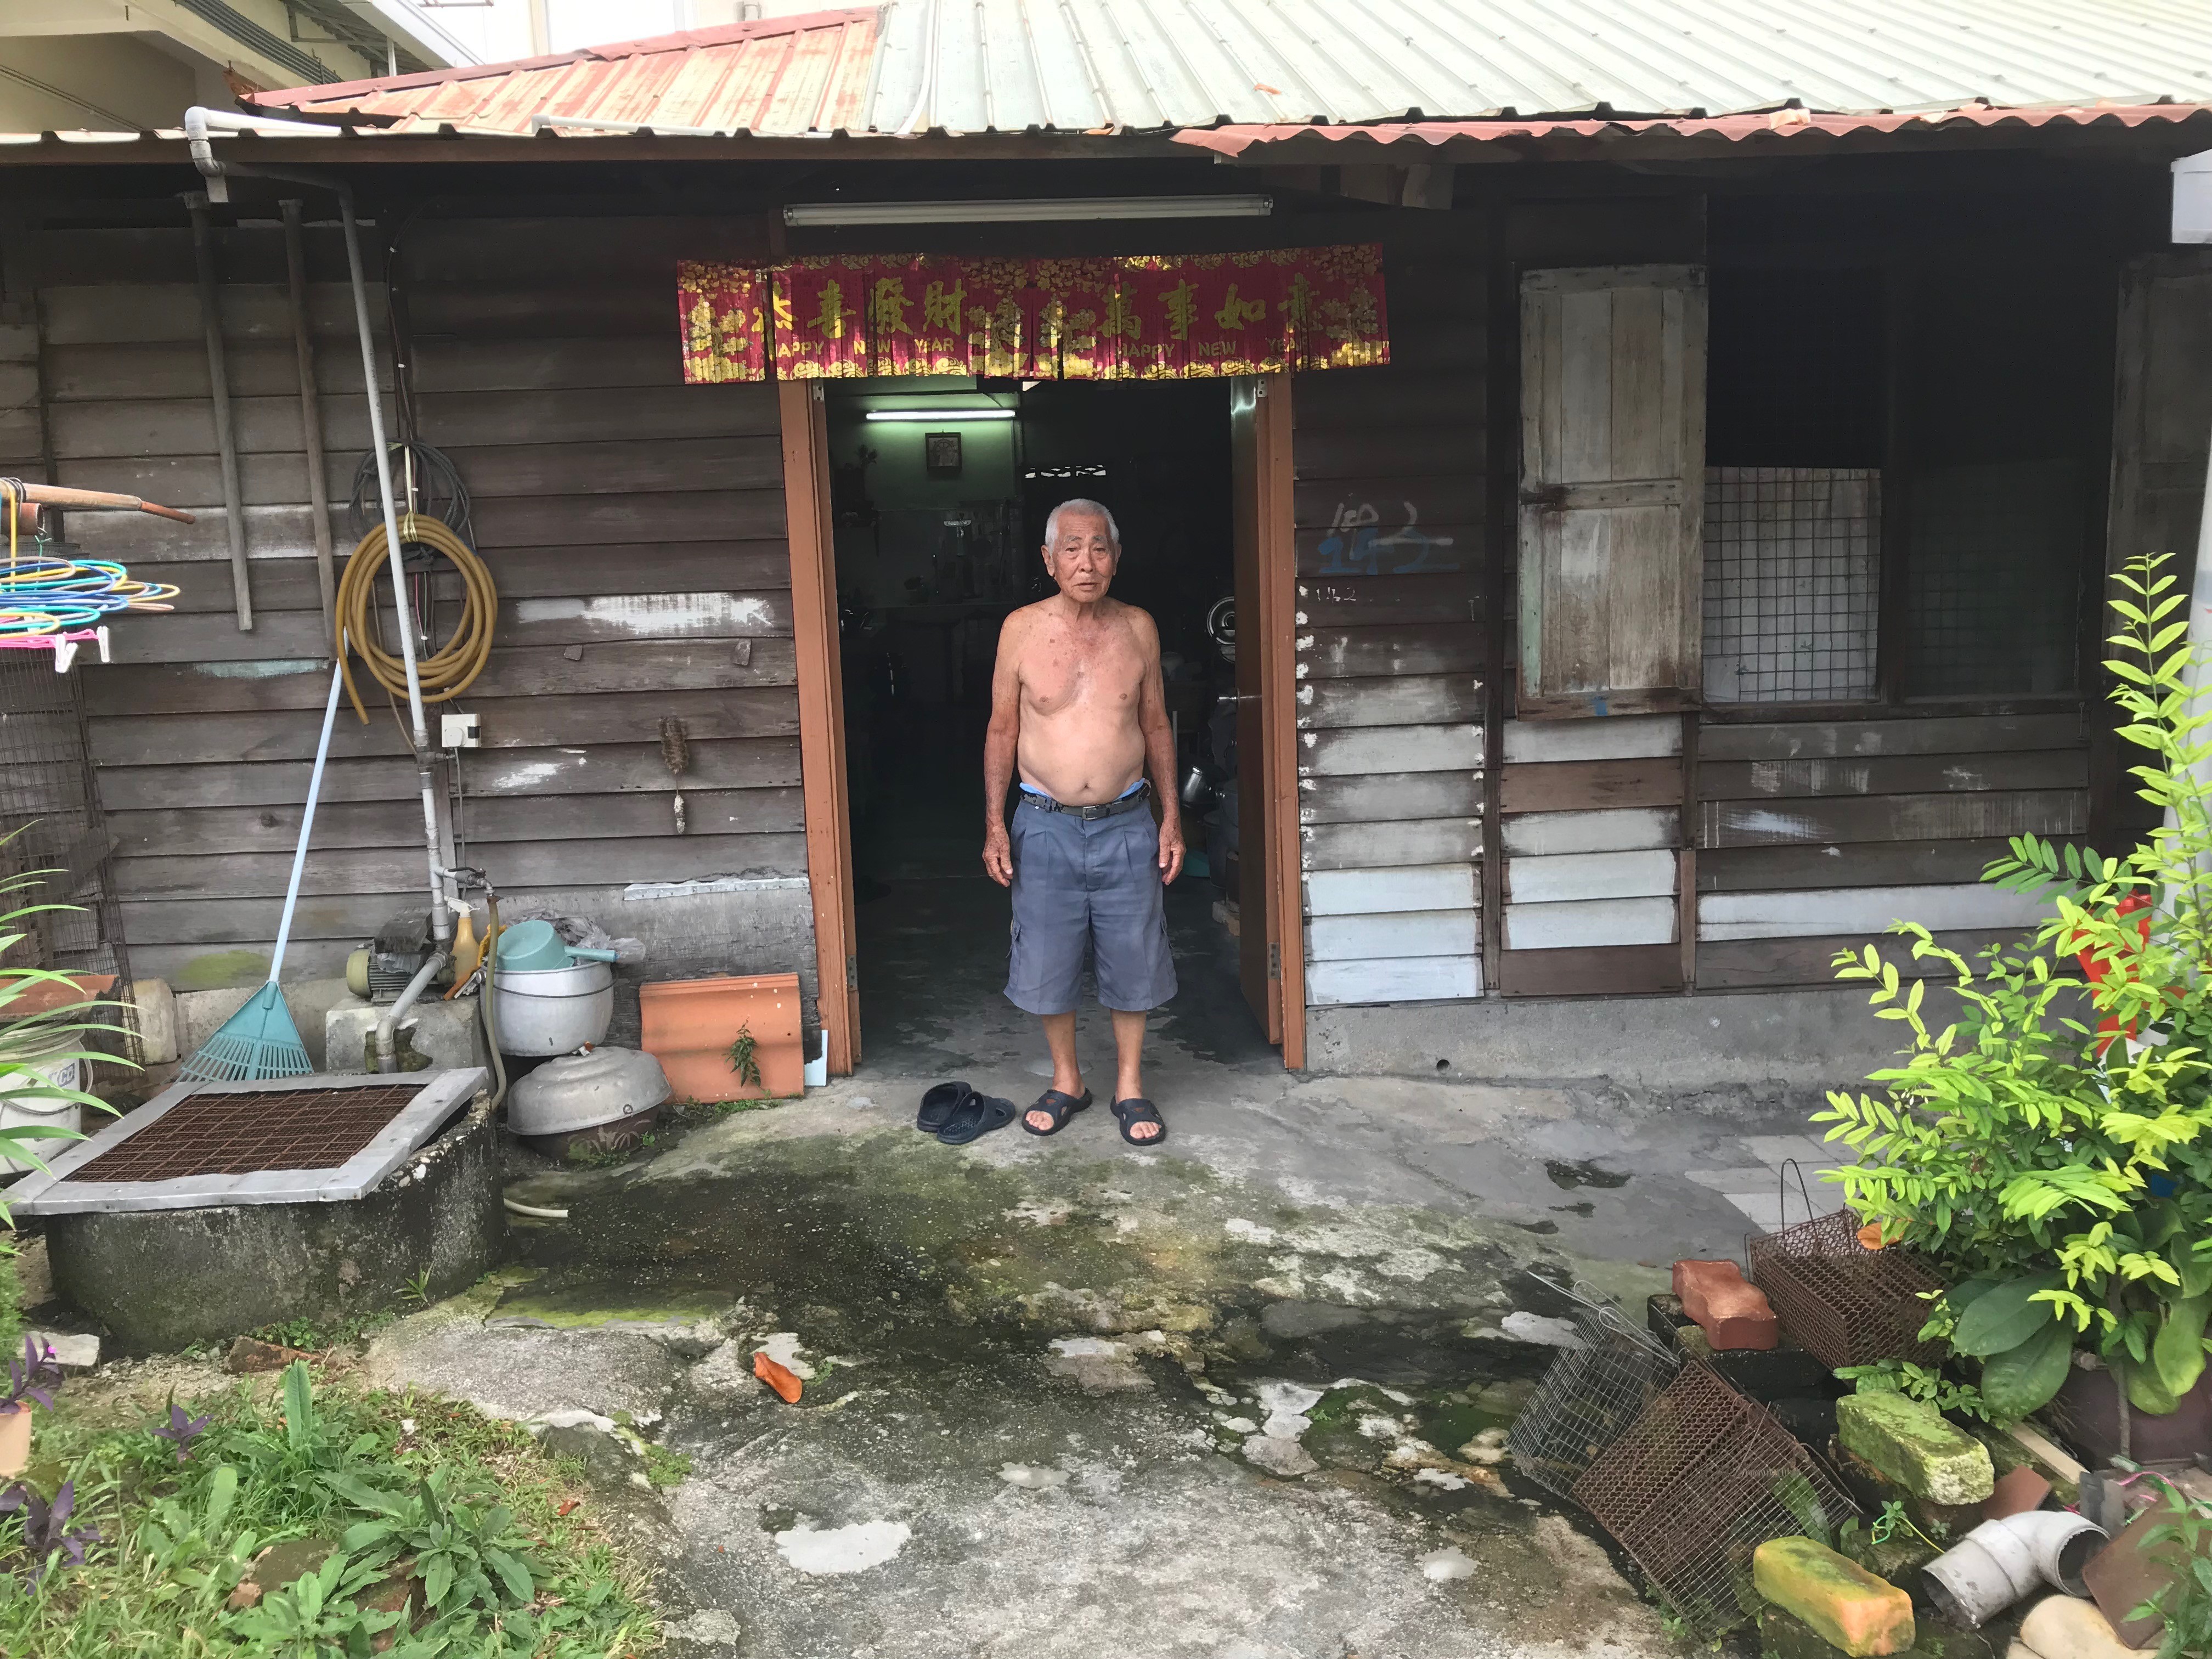 An elderly villager outside his wooden house in Kampung Cempaka, Malaysia. Photo: Project Community Kampung Cempaka